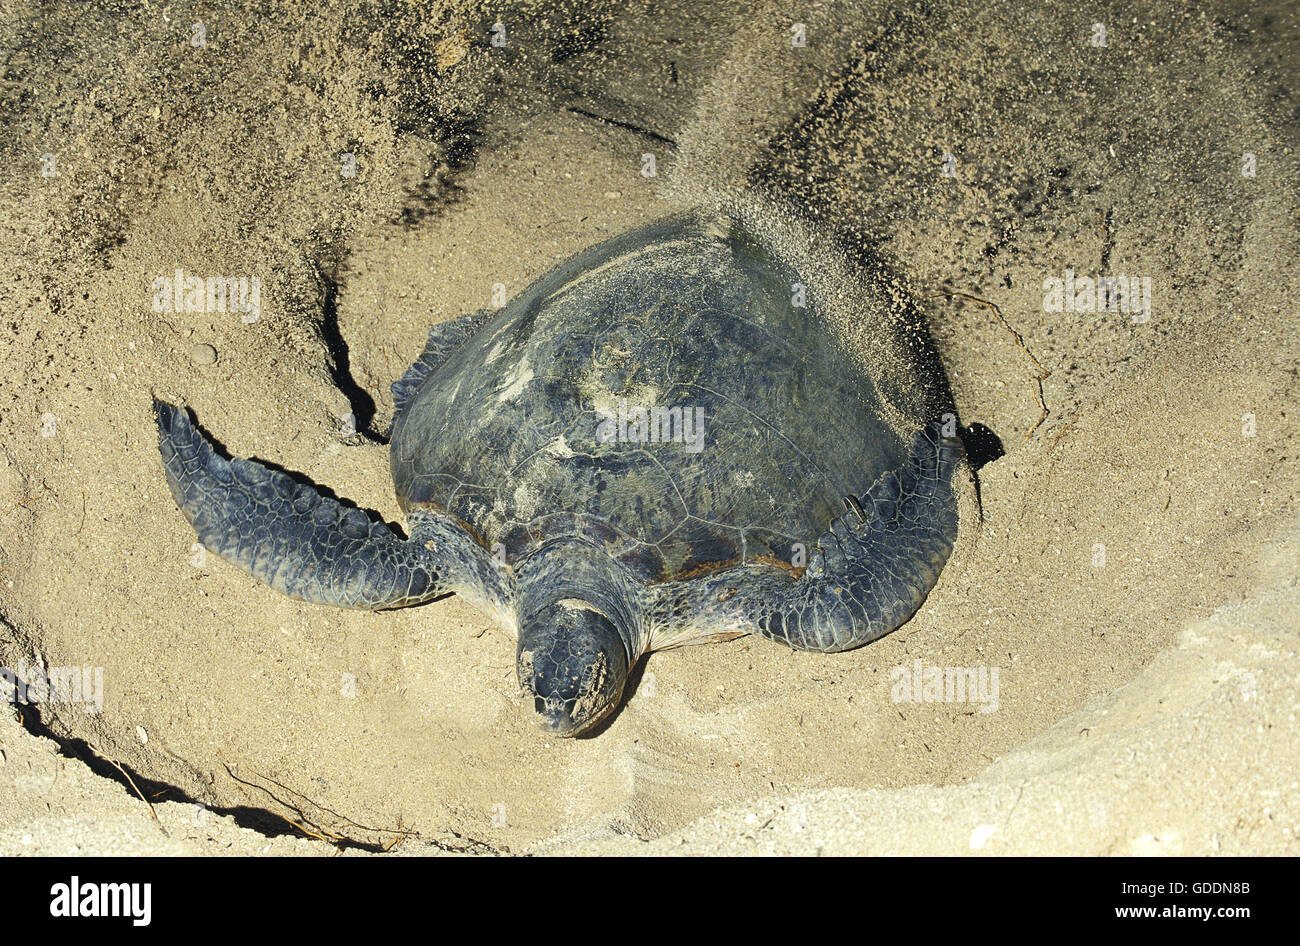 Green Sea Turtle, chelonia mydas, Female covering Eggs with Sand, after Laying, Malaysia Stock Photo